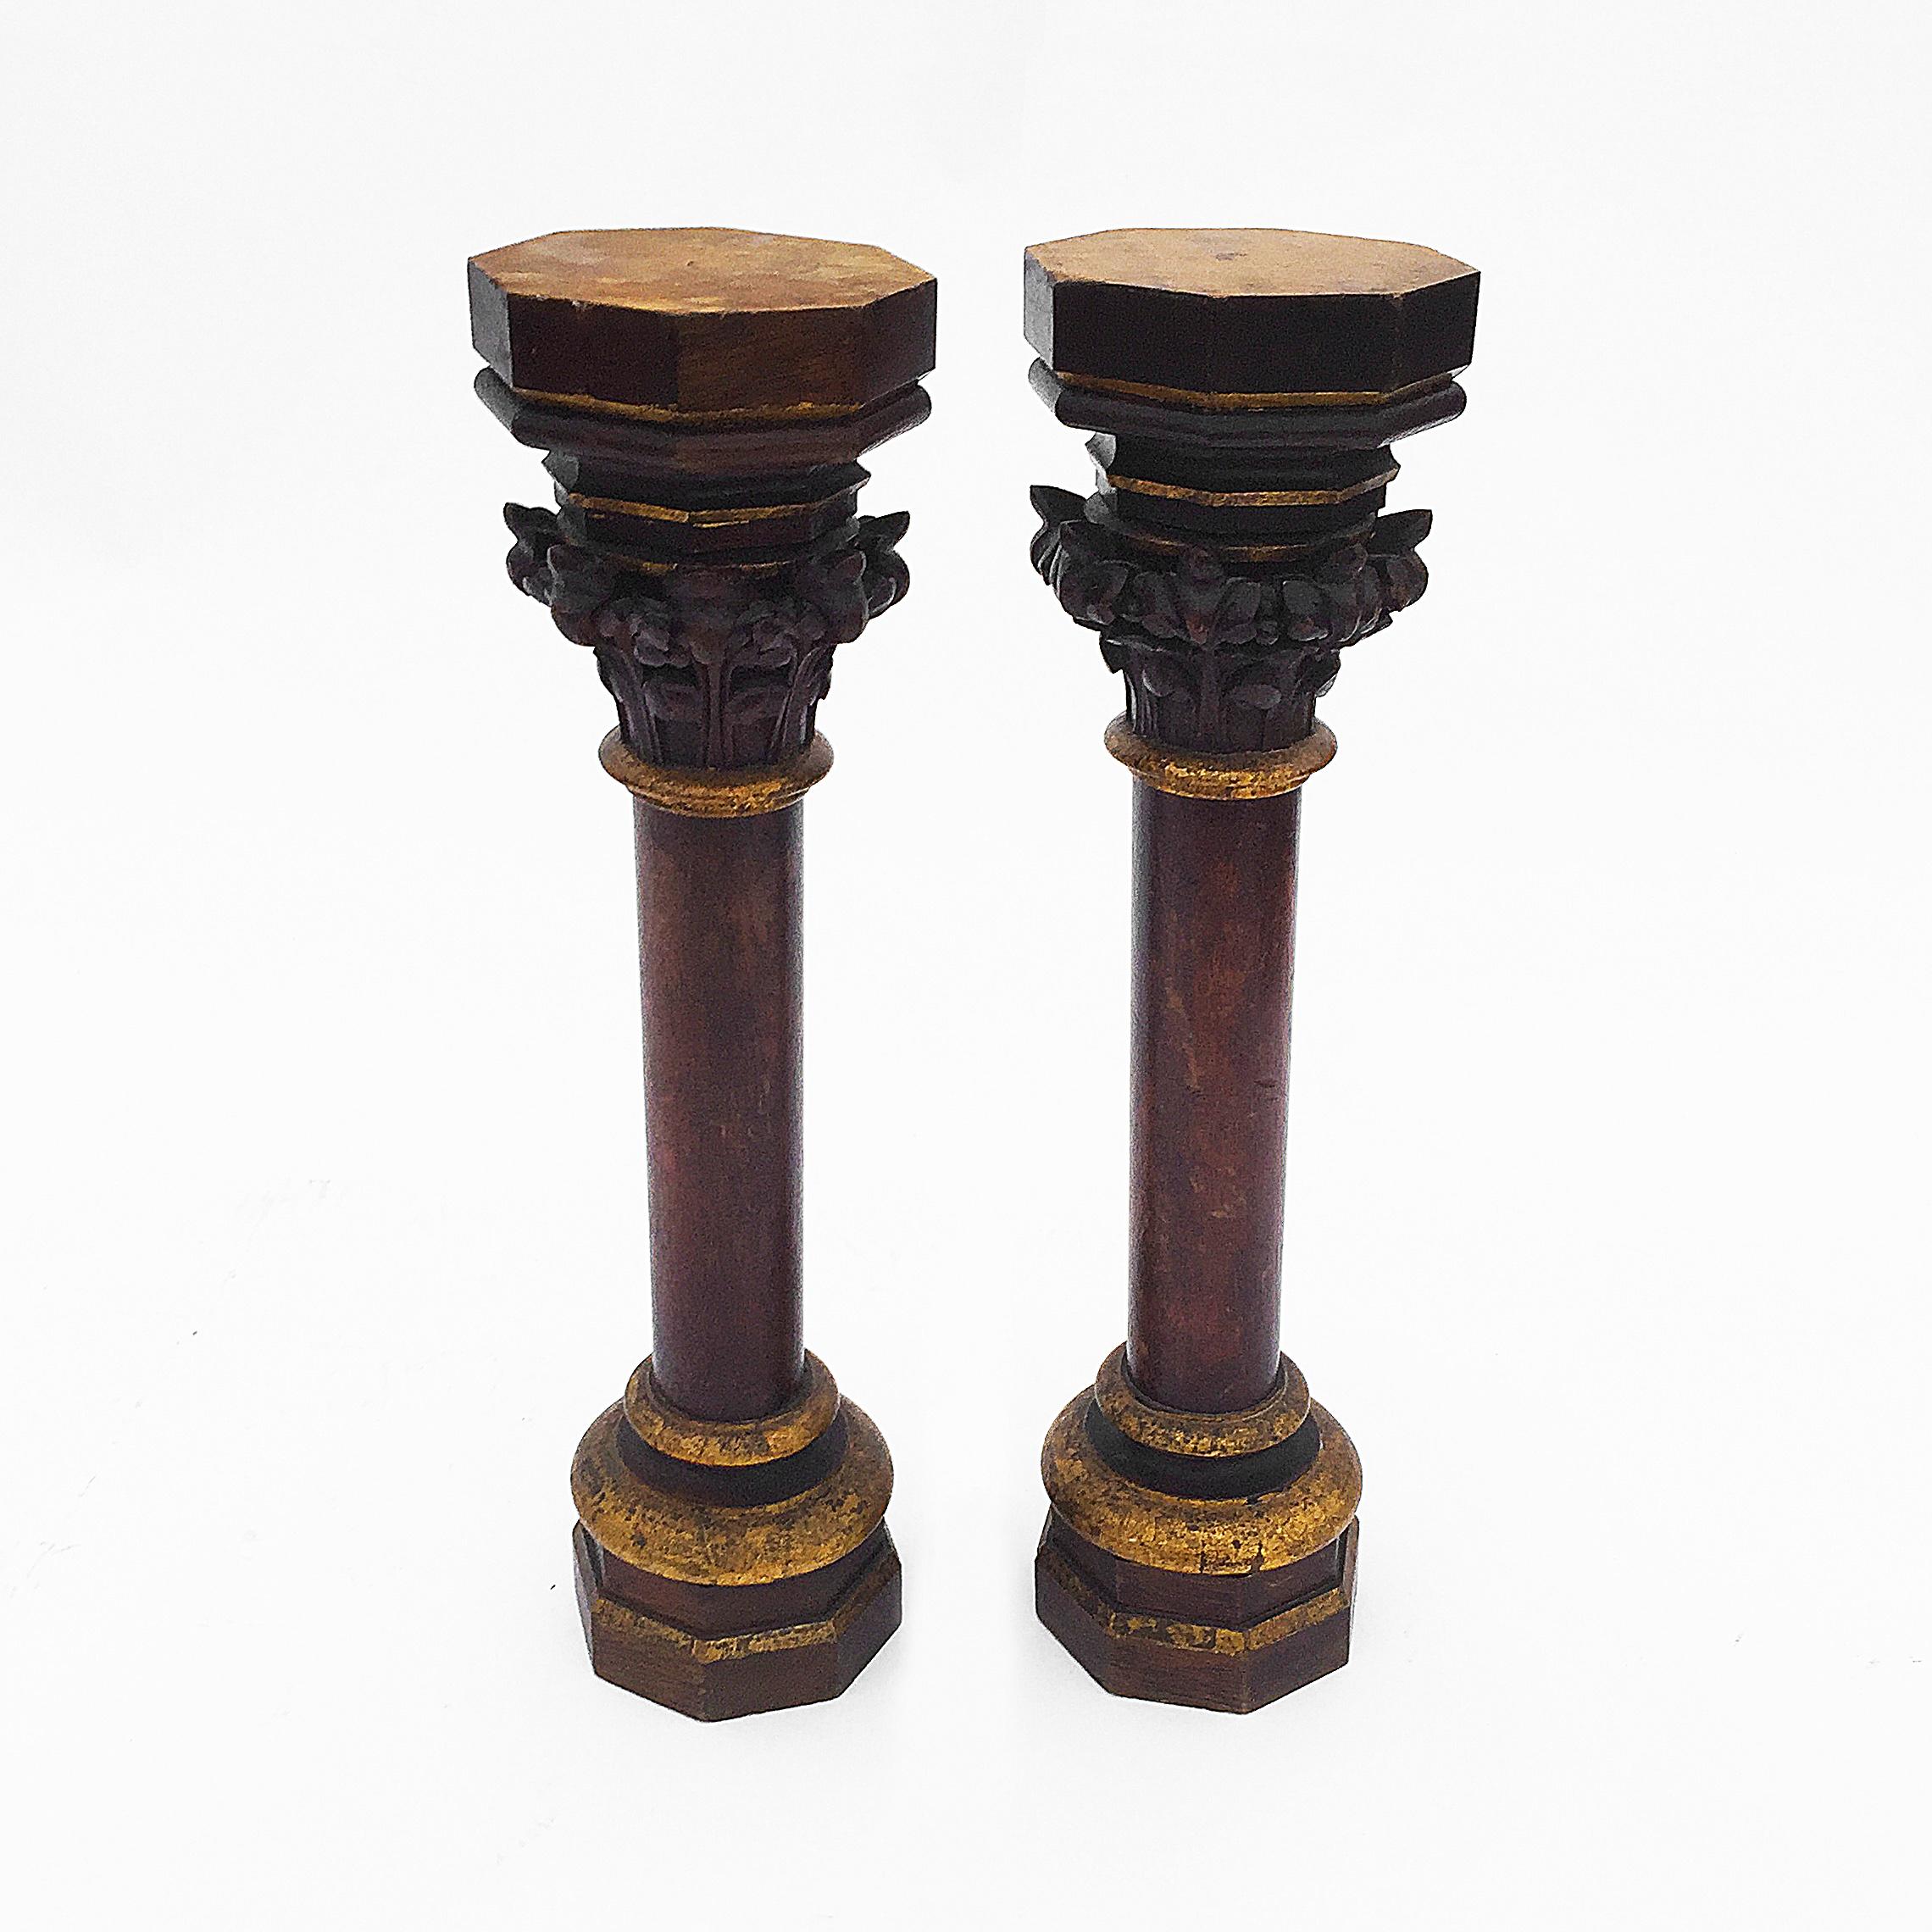 A handcrafted pair of small oak Gothic church columns from the late 1800s. Vanished with gilded details and beautiful 100 year patina all-over. Imported from Belgium and specifically from the Flemish region. The can be used as architectural feature